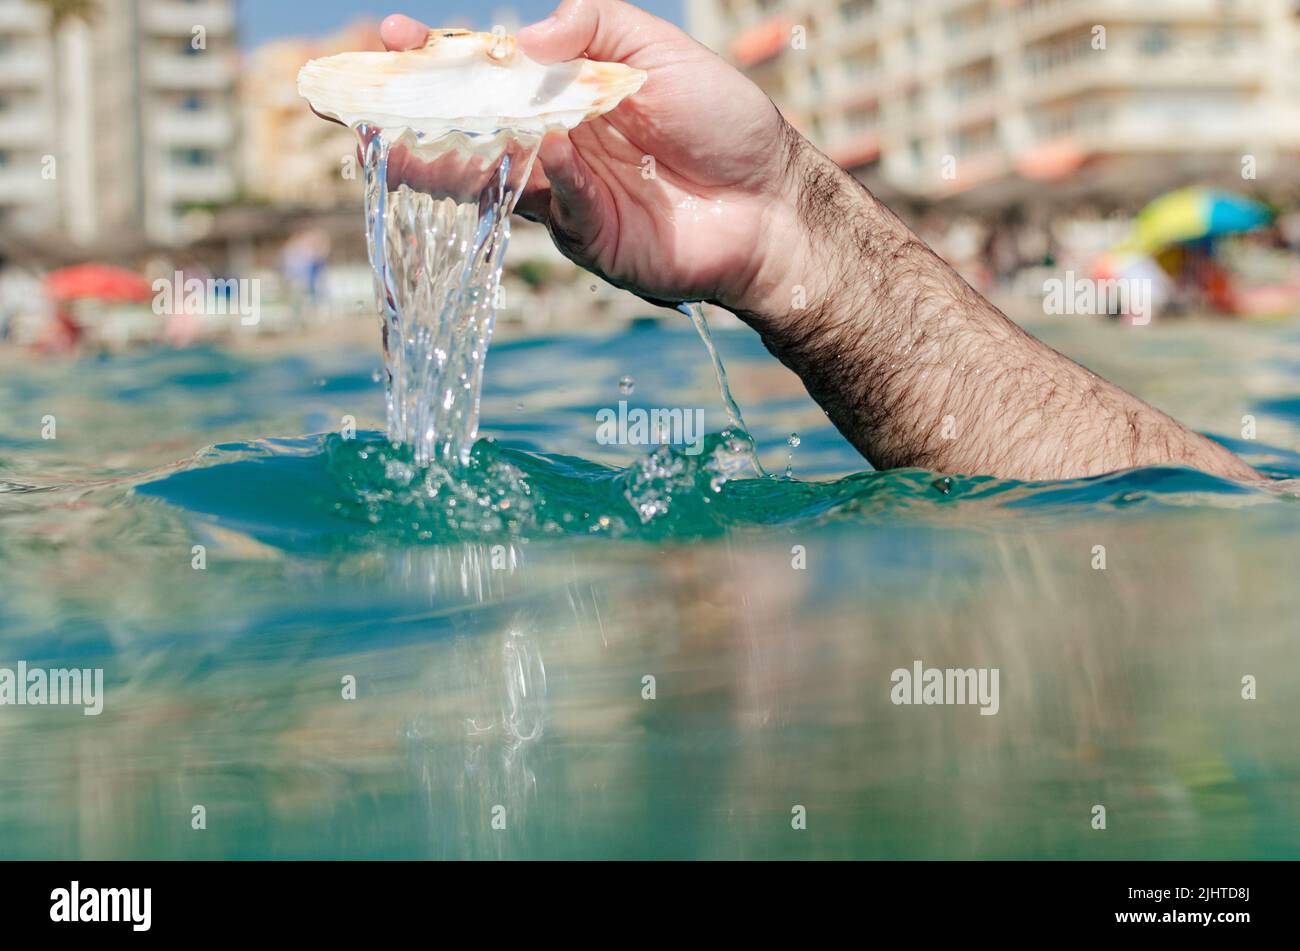 Hand holding the shell of a scallop in the sea. Torremolinos, Málaga, Costa de Sol, Andalucia, Spain, Europe Stock Photo